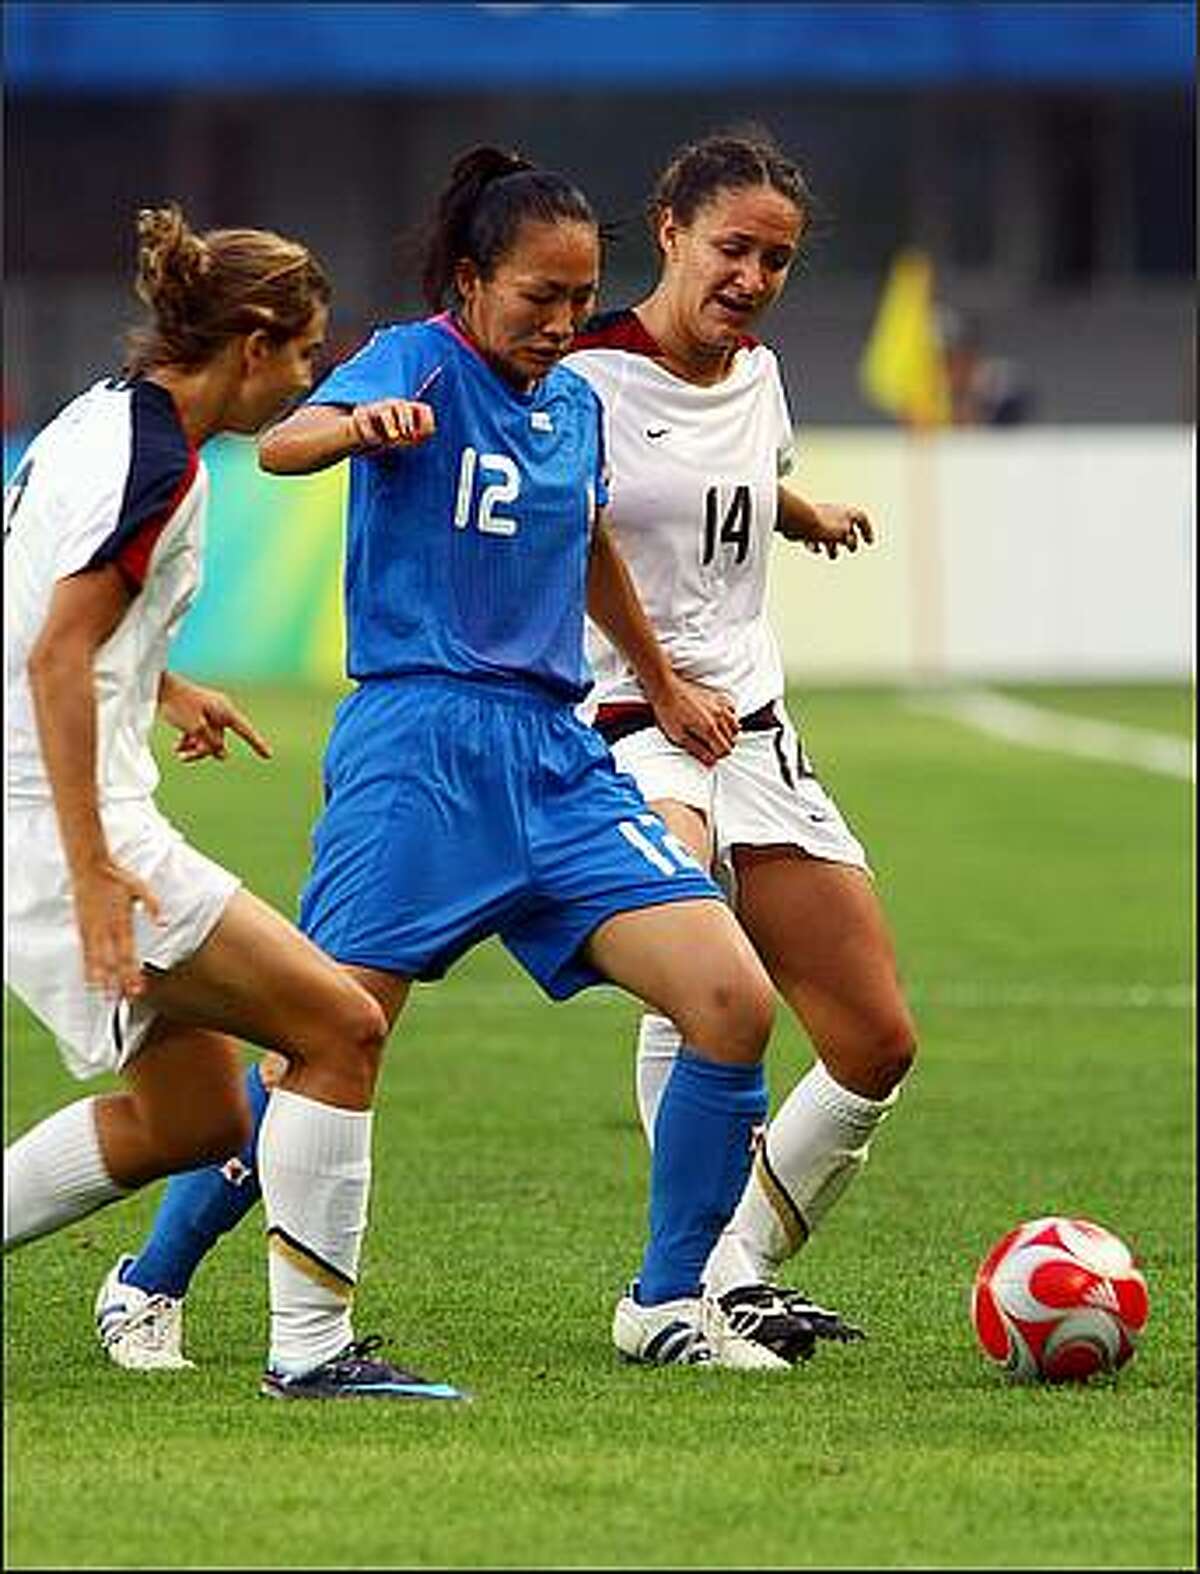 Karina Maruyama (C) of Japan vies with Stephanie Cox (R) of the US during their first round Group G women's football match of the 2008 Beijing Olympic Games at the Qinghuangdao Olympic Stadium. The defending US team defeated Japan by 1-0.